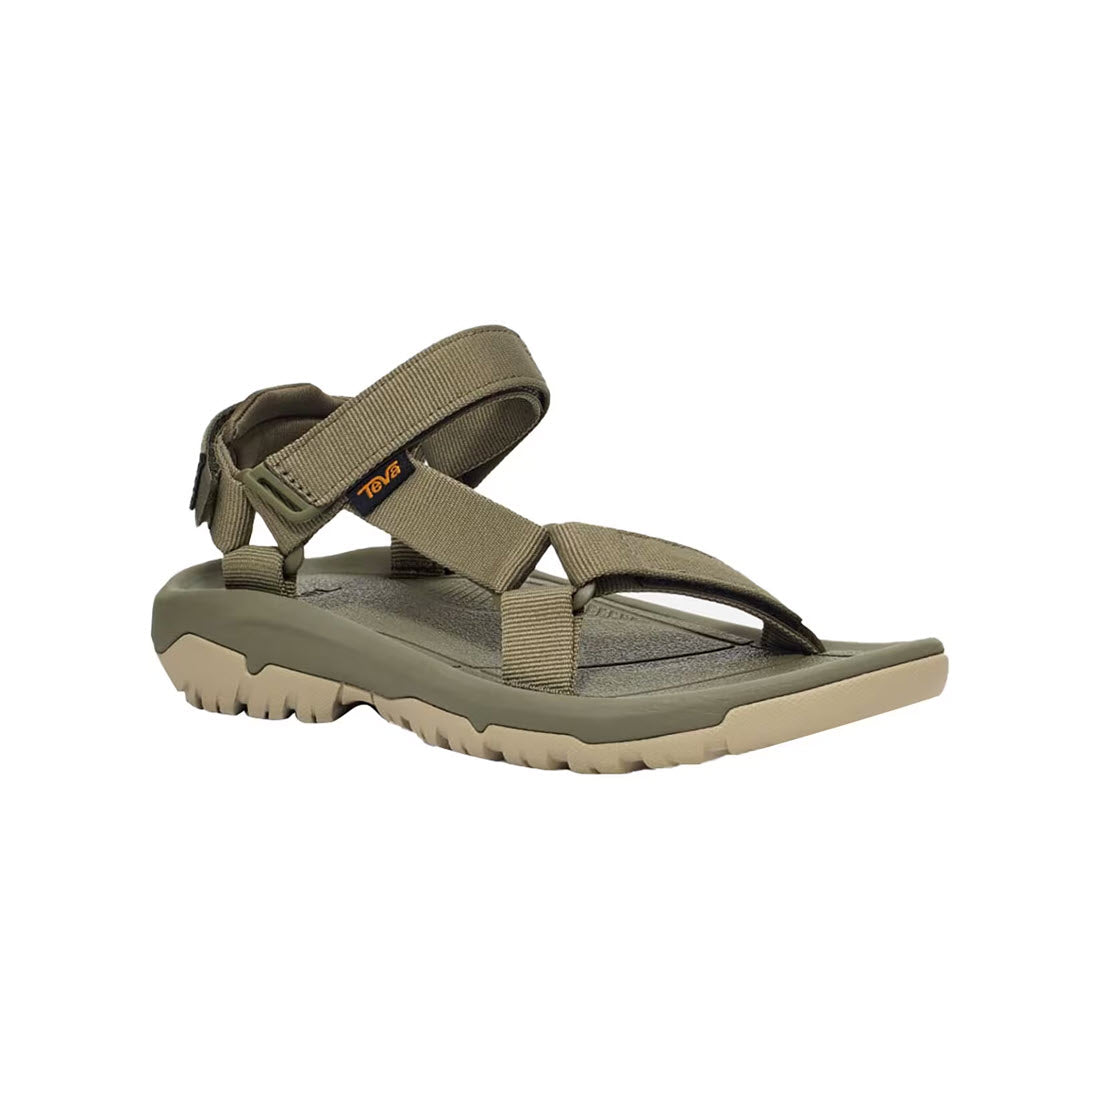 Olive green Teva Hurricane XLT2 sports sandal with adjustable straps, thick sole, and a branded label on the strap, isolated on a white background.